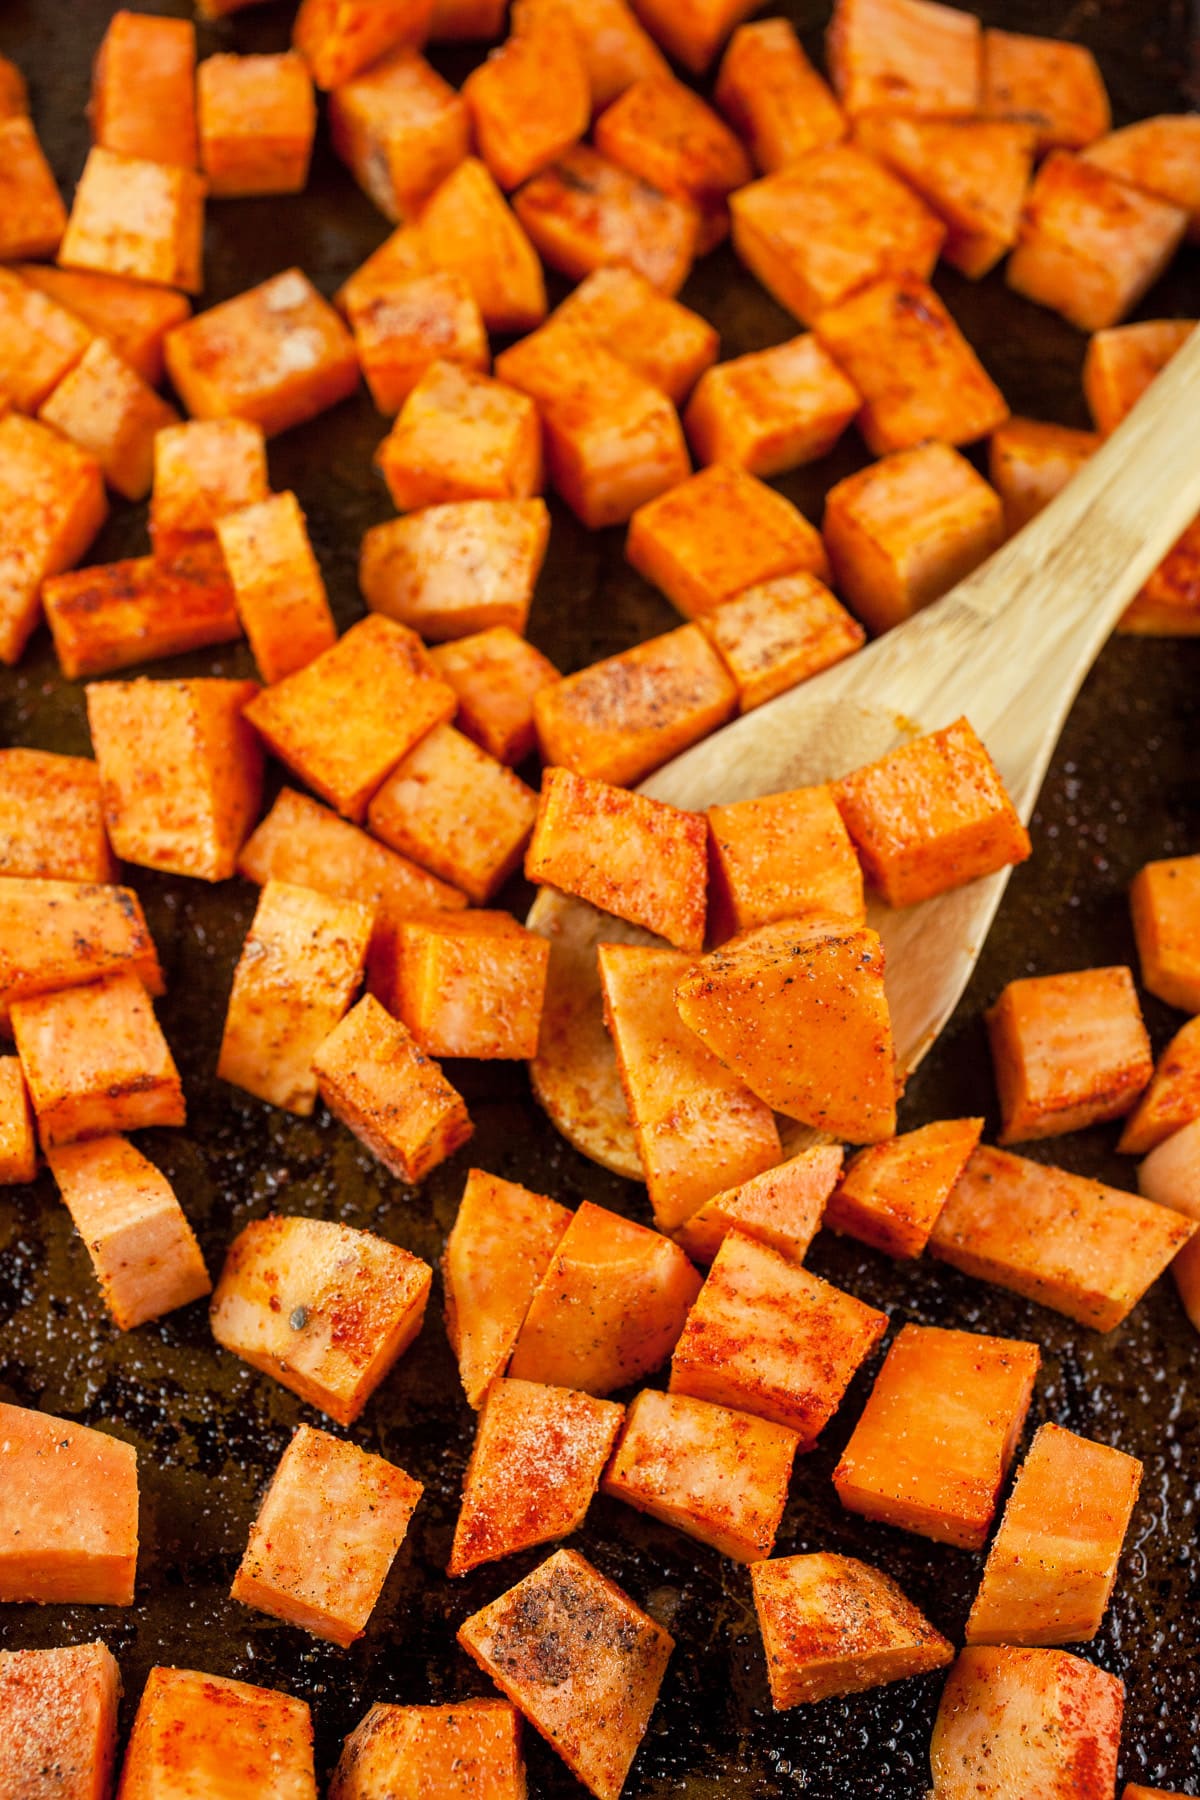 Uncooked diced sweet potatoes on baking sheet with wooden spoon.